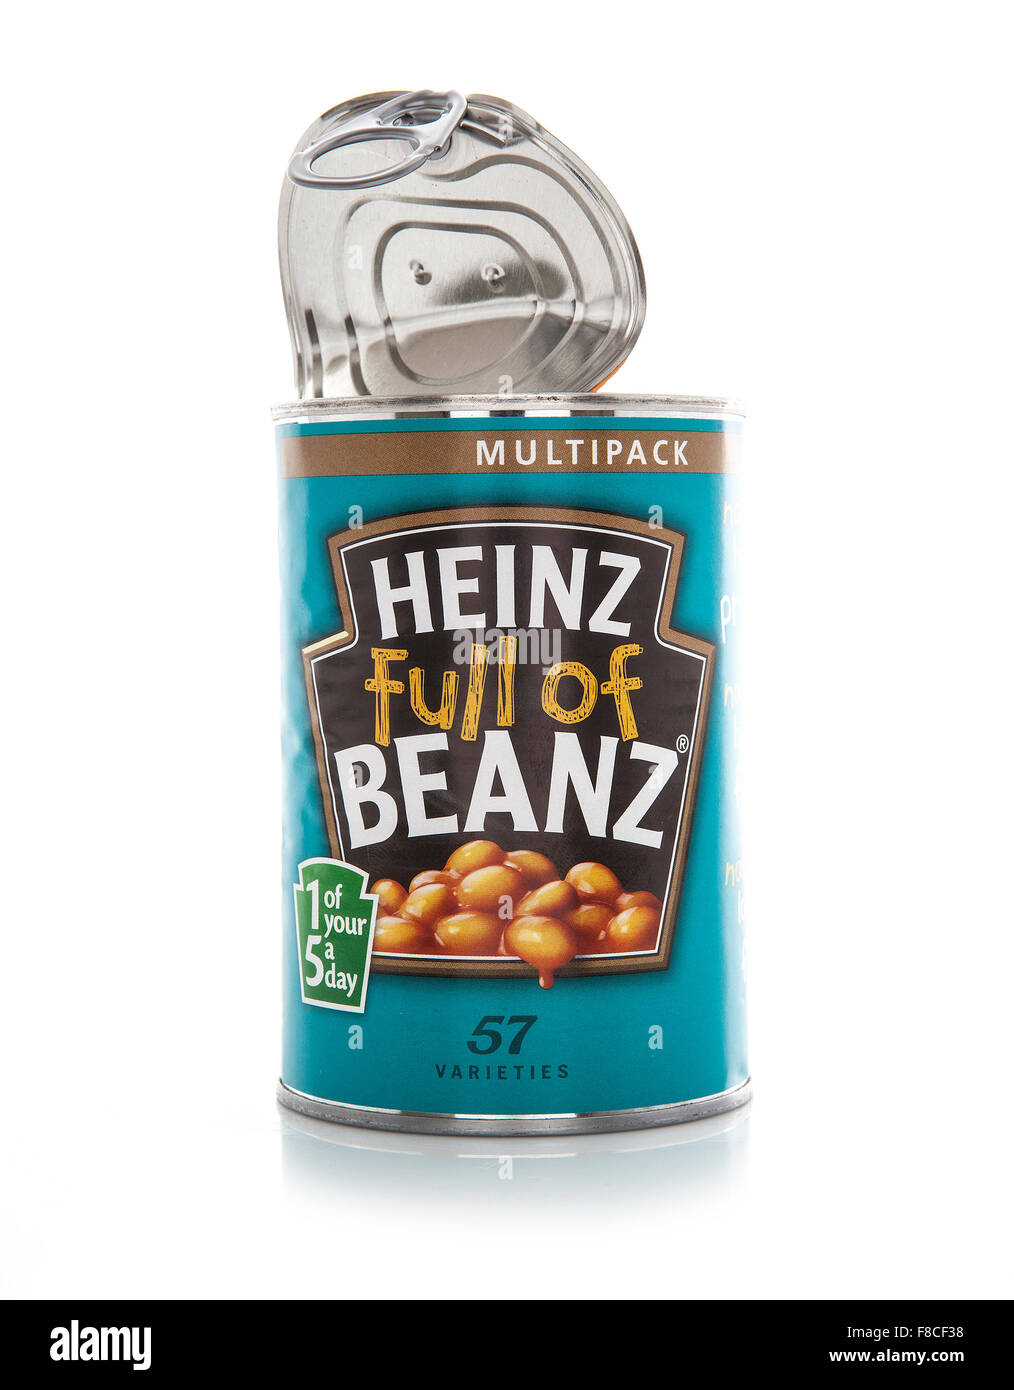 Can of Heinz Beanz baked beans in tomato sauce isolated on white background. Stock Photo